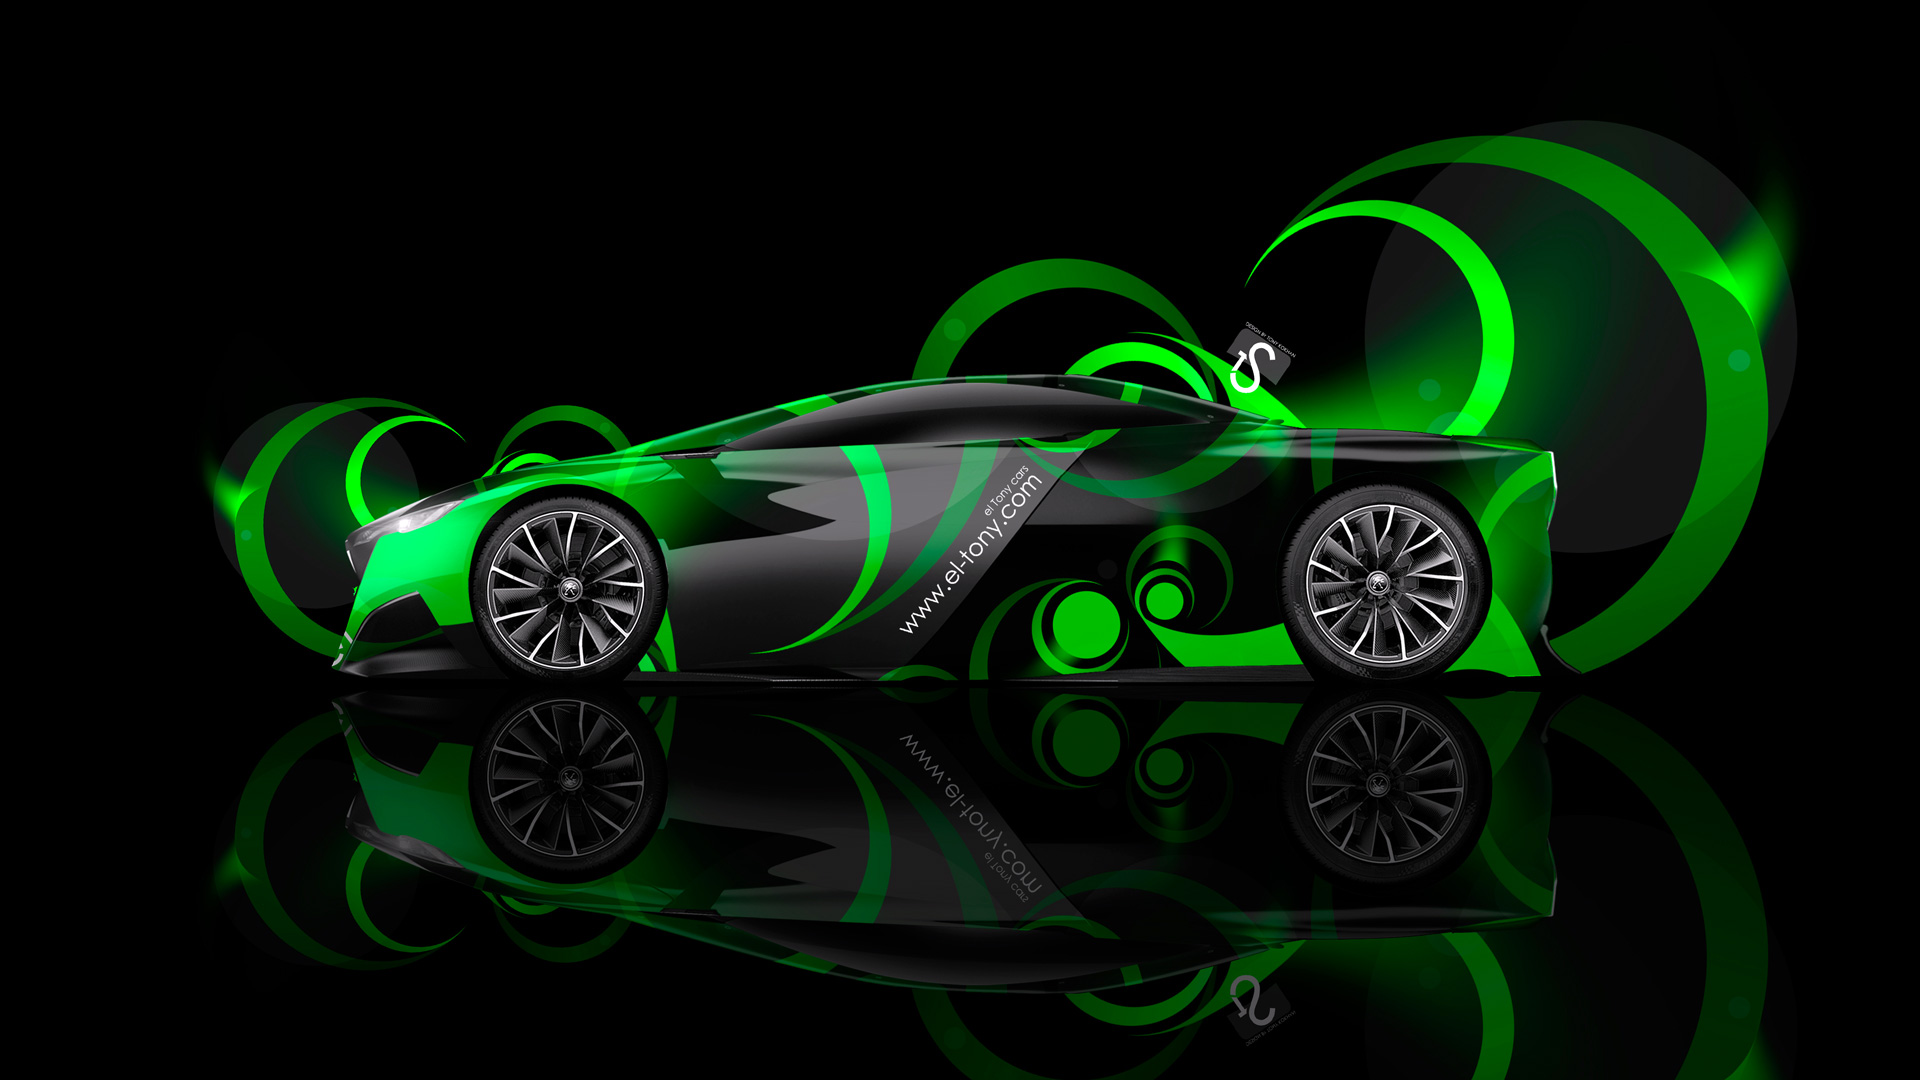 Peugeot Onyx Side Super Abstract Car Green Neon HD Wallpaper